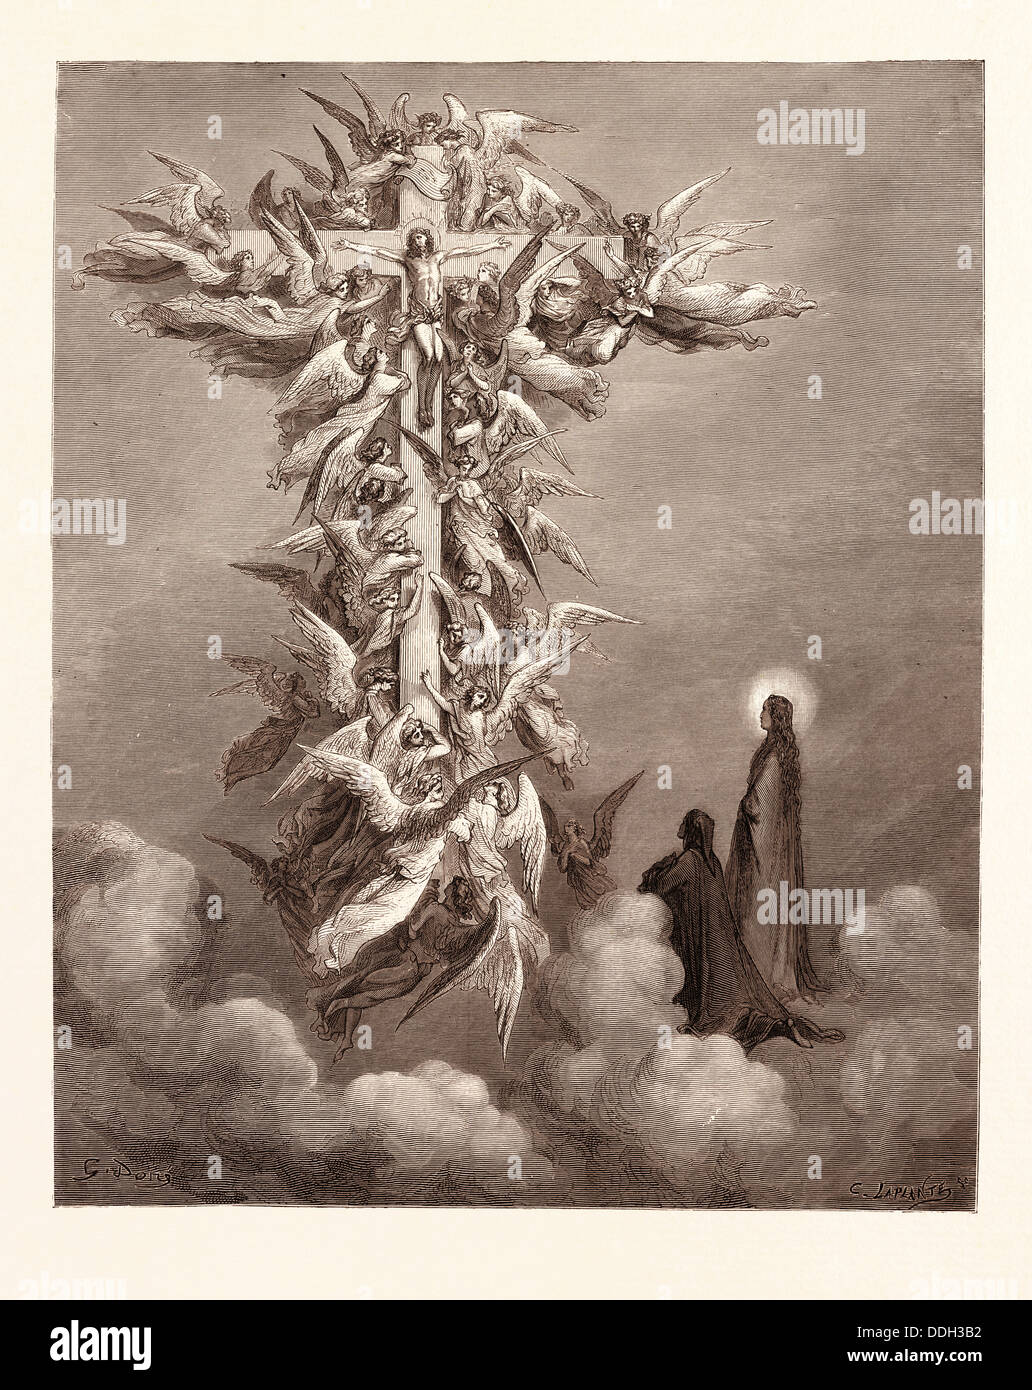 THE VISION OF THE CROSS, BY GUSTAVE DORÉ. Gustave Dore, 1832 - 1883, French. Engraving for the Purgatorio or Purgatory by Dante Stock Photo